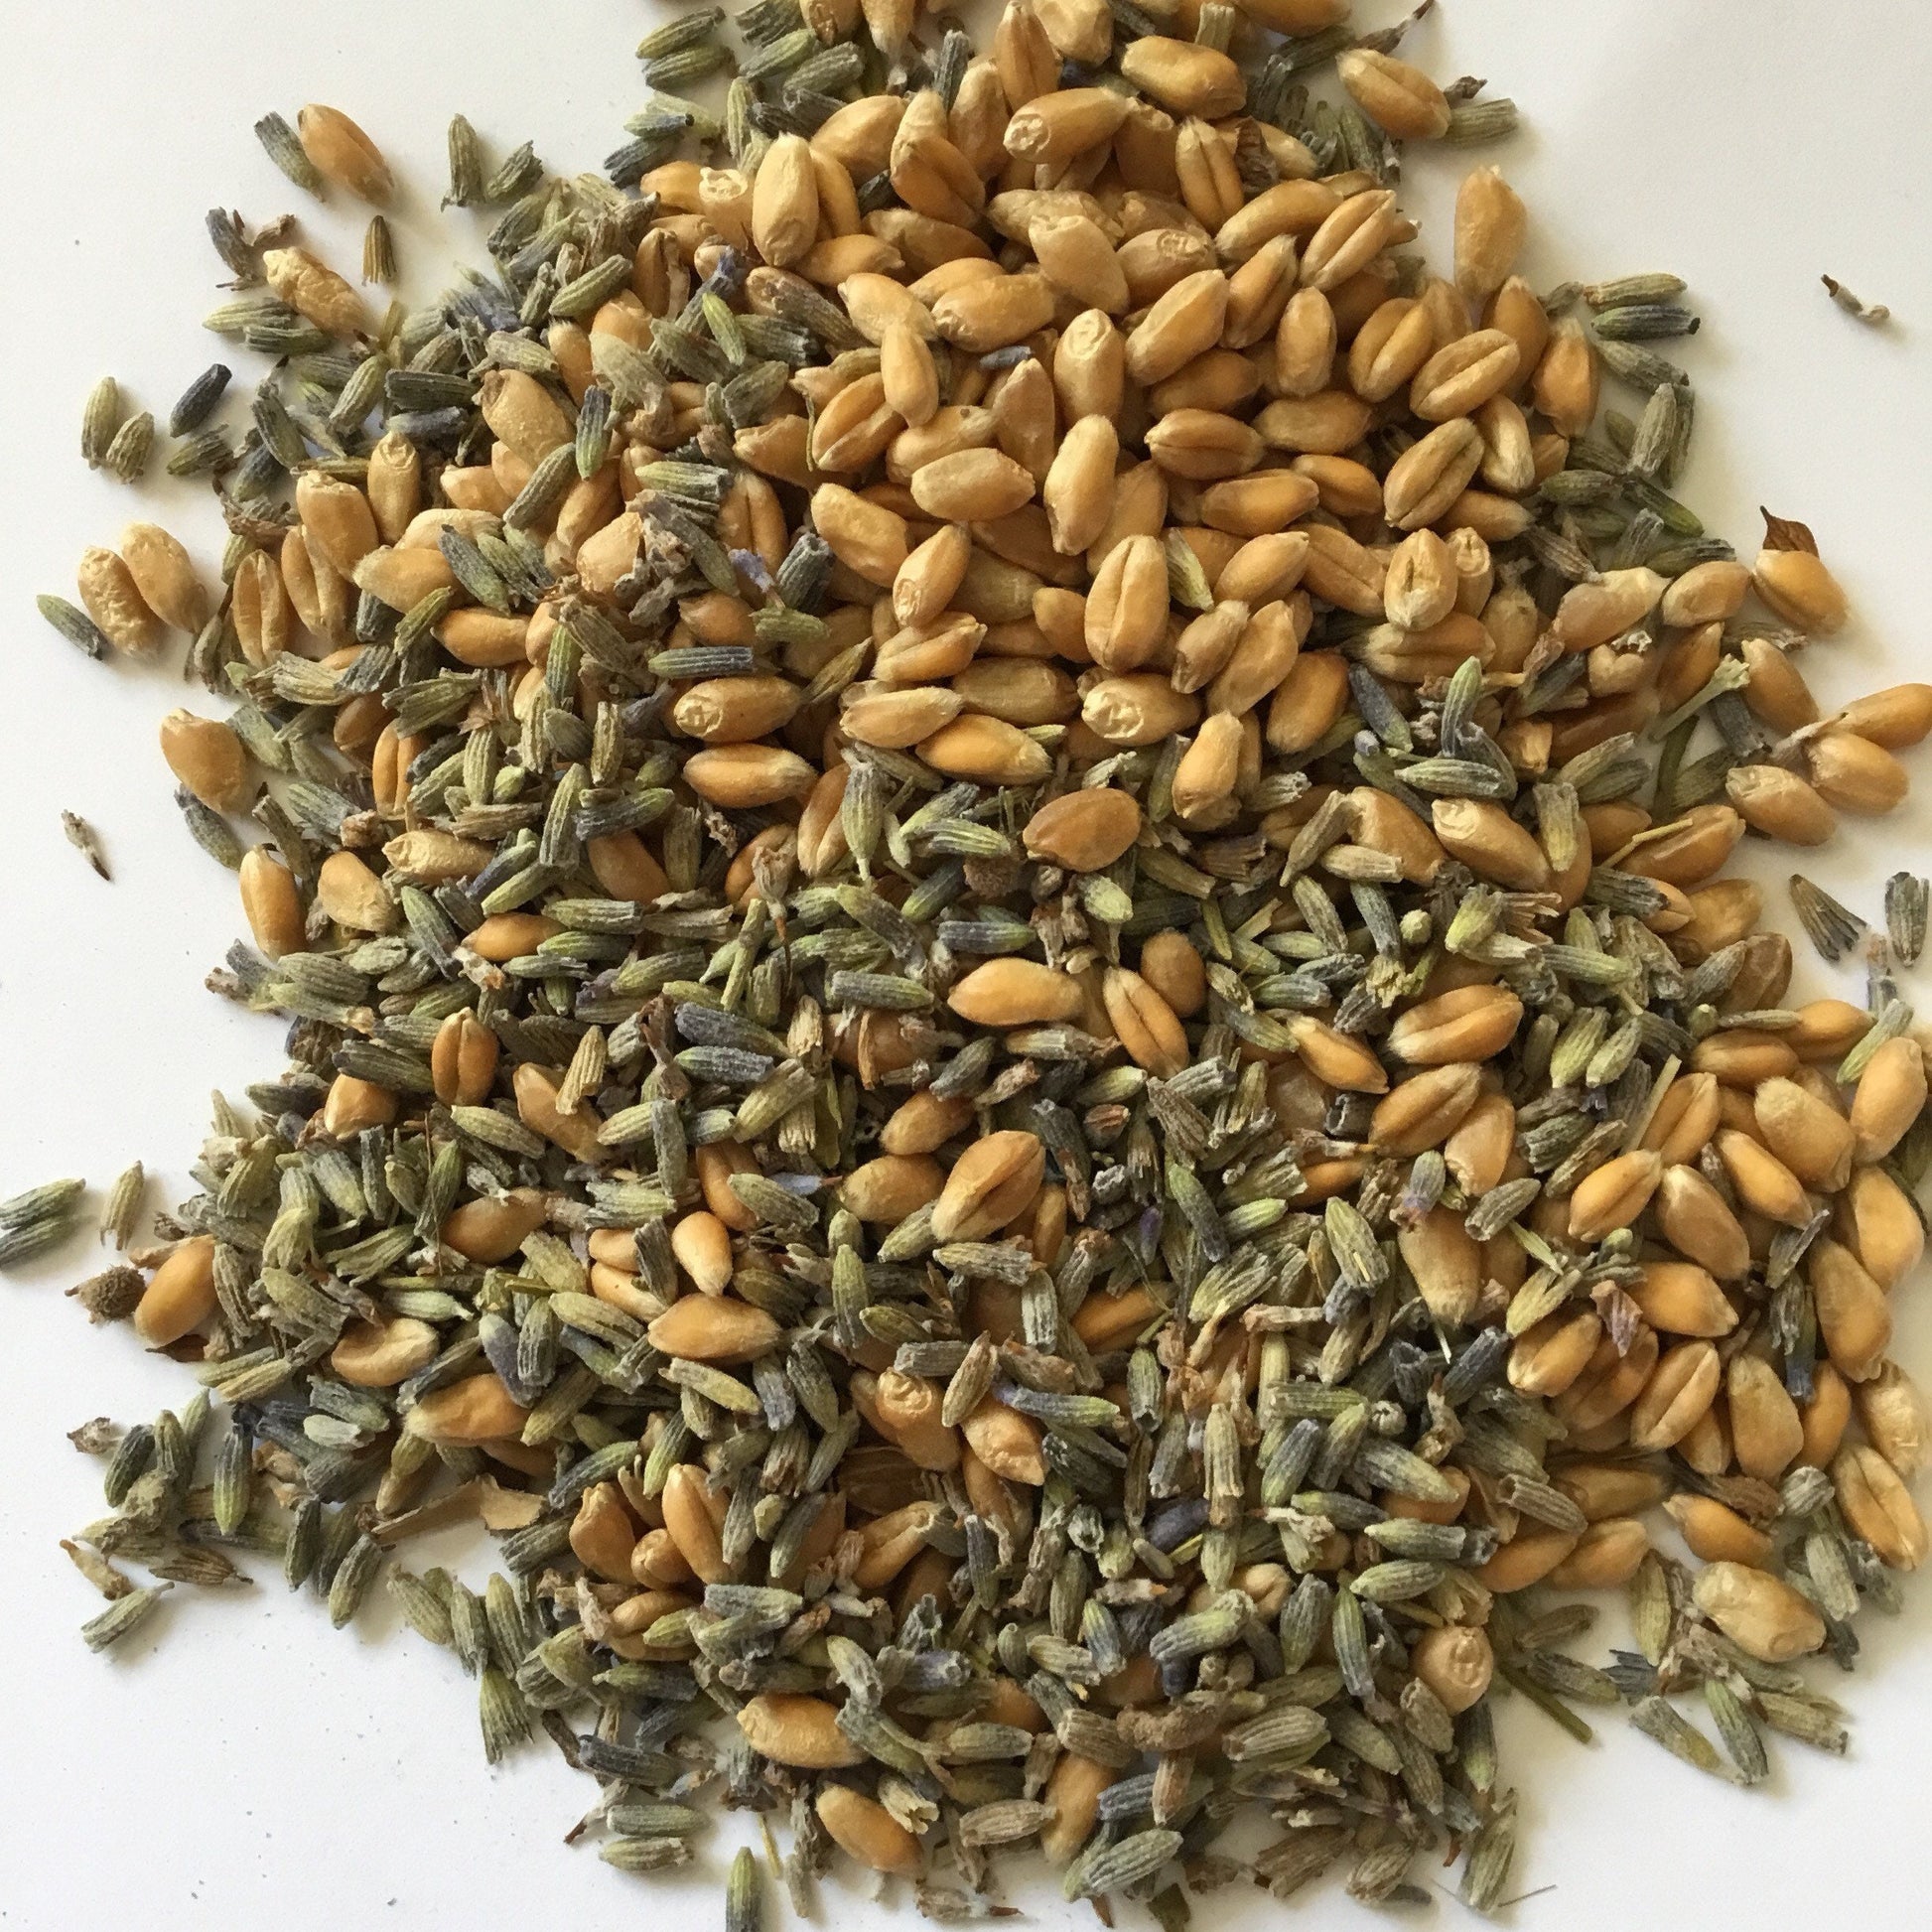 Somerset whole wheat and dried lavender buds, filling for WheatBagHeaven handcrafted wheat bags